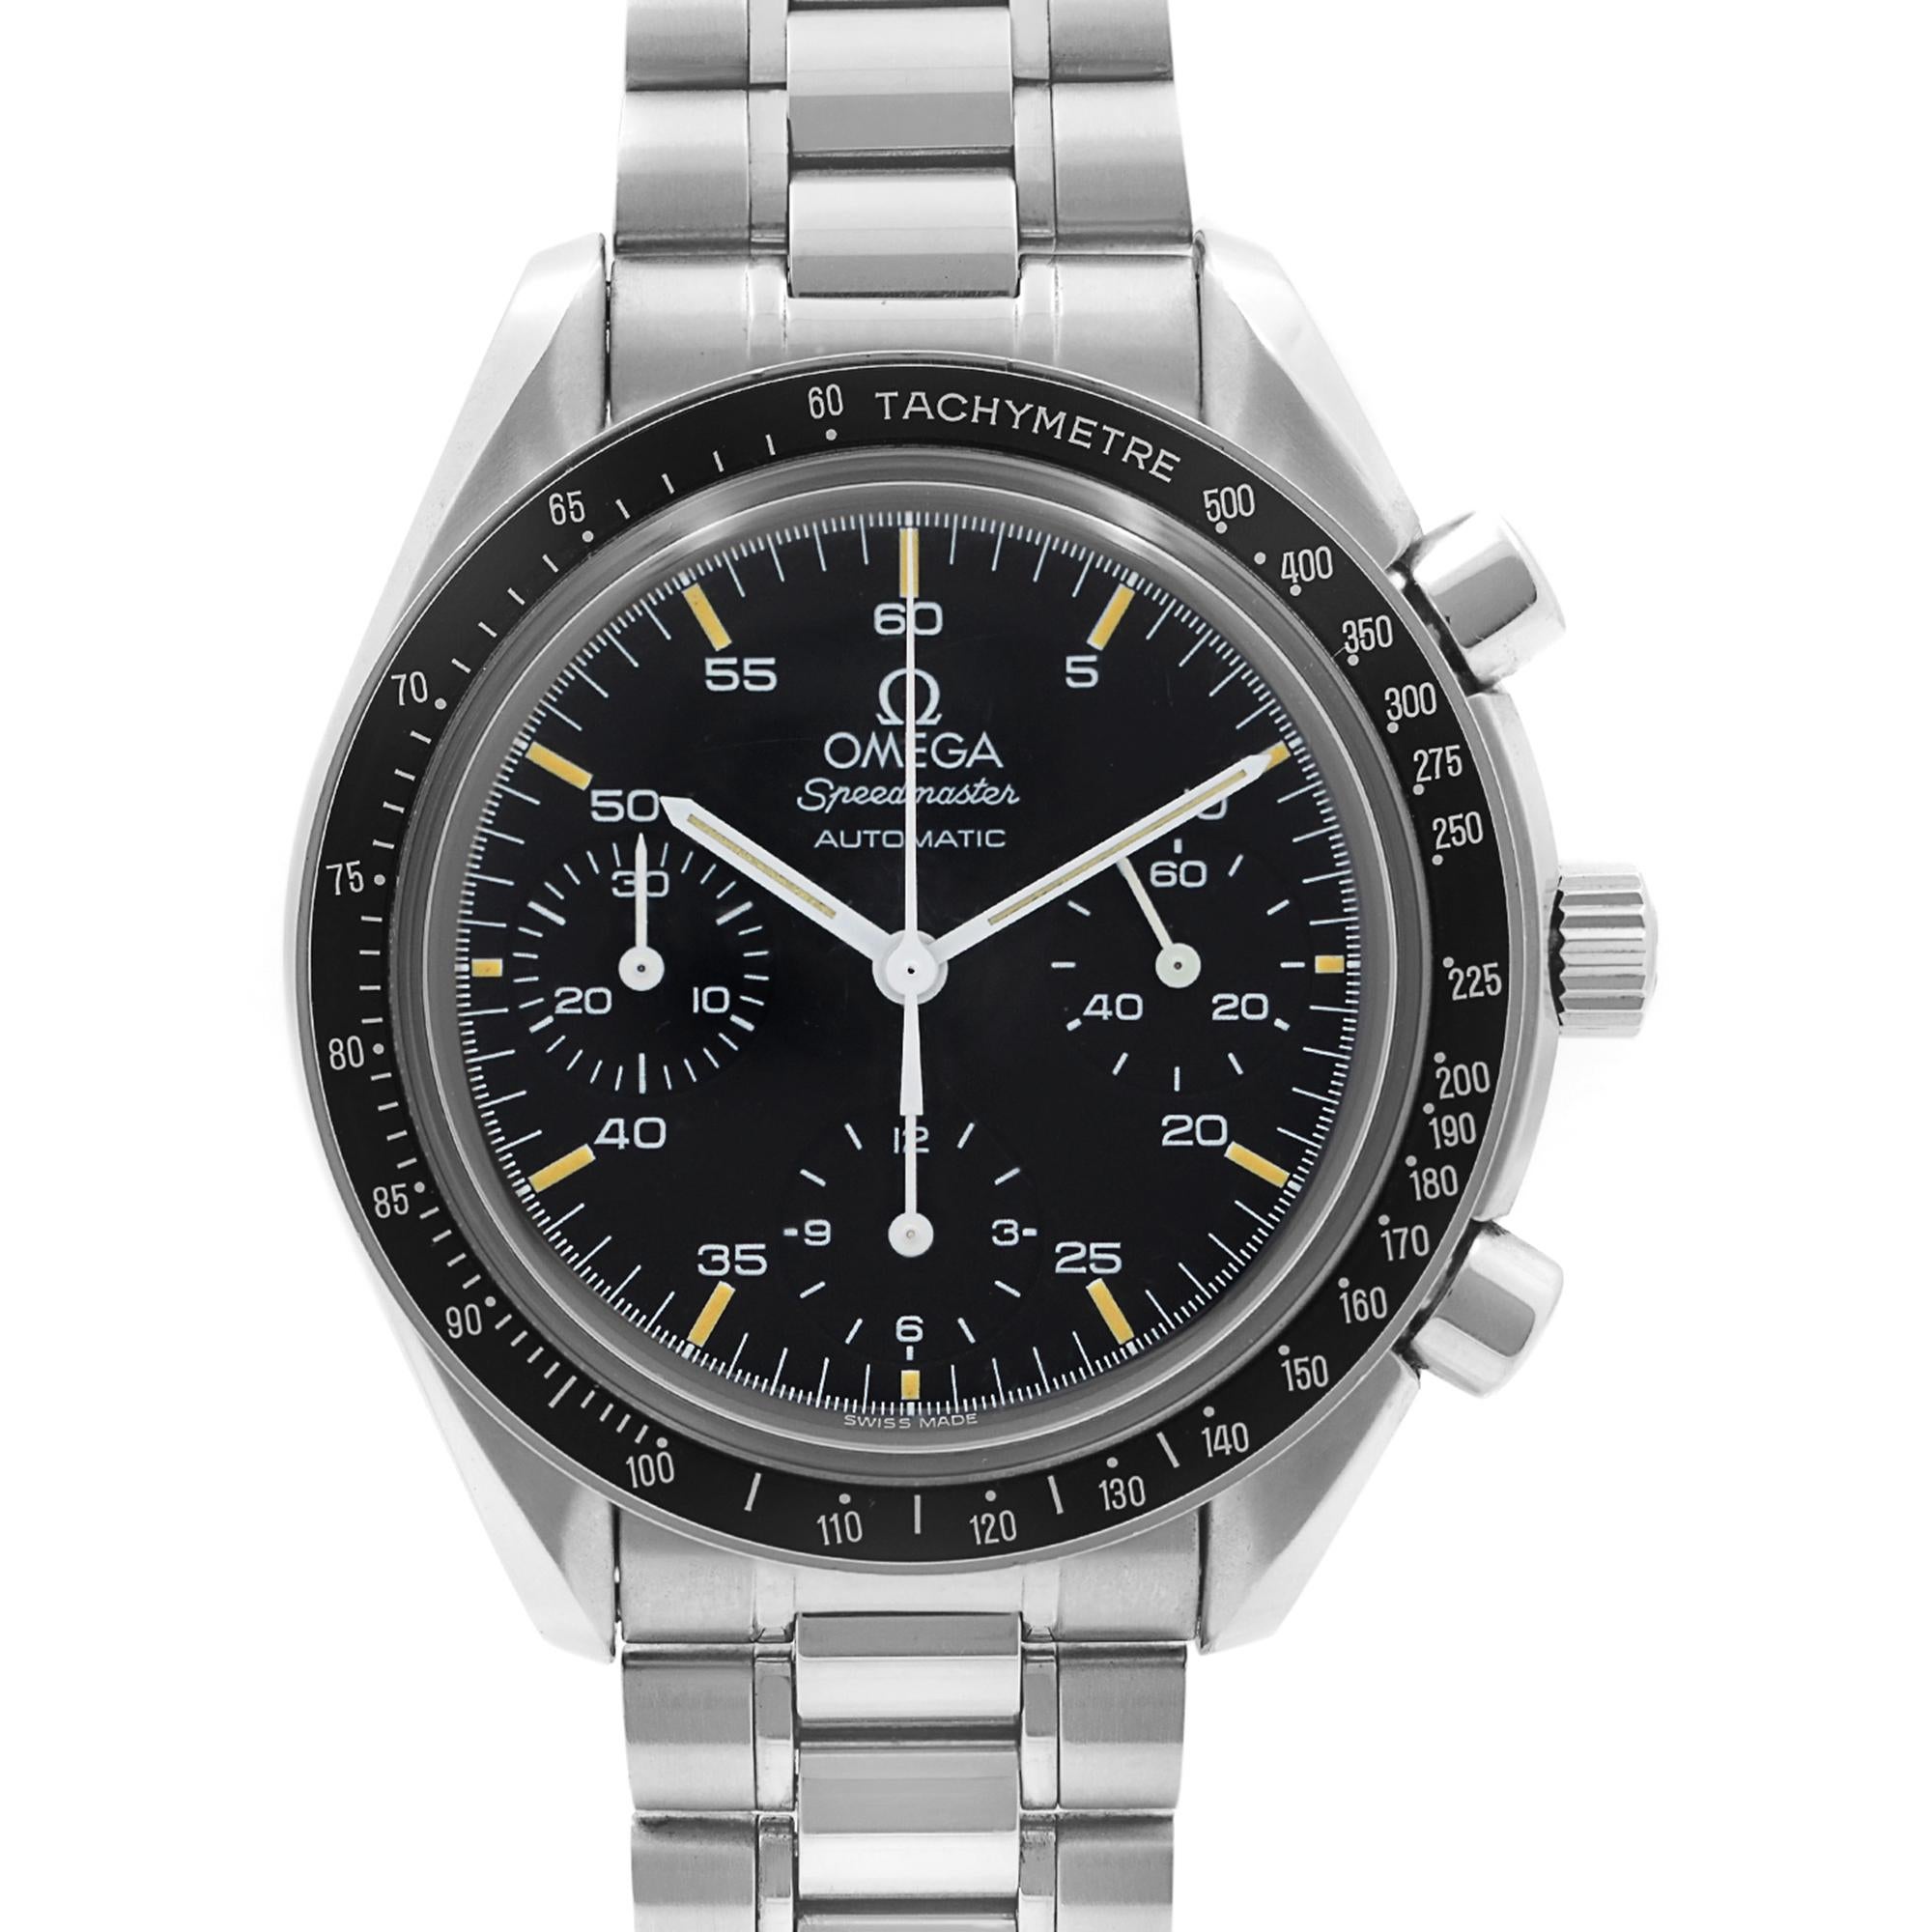 Pre Owned Omega Speedmaster Reduced 39mm Steel Black Dial Automatic Men's Watch 3510.50.00. This Beautiful Timepiece Features: Stainless Steel Case & Bracelet Fixed Stainless Steel Bezel with Black Tachymeter Scale Top Ring, Black Dial. Chronograph